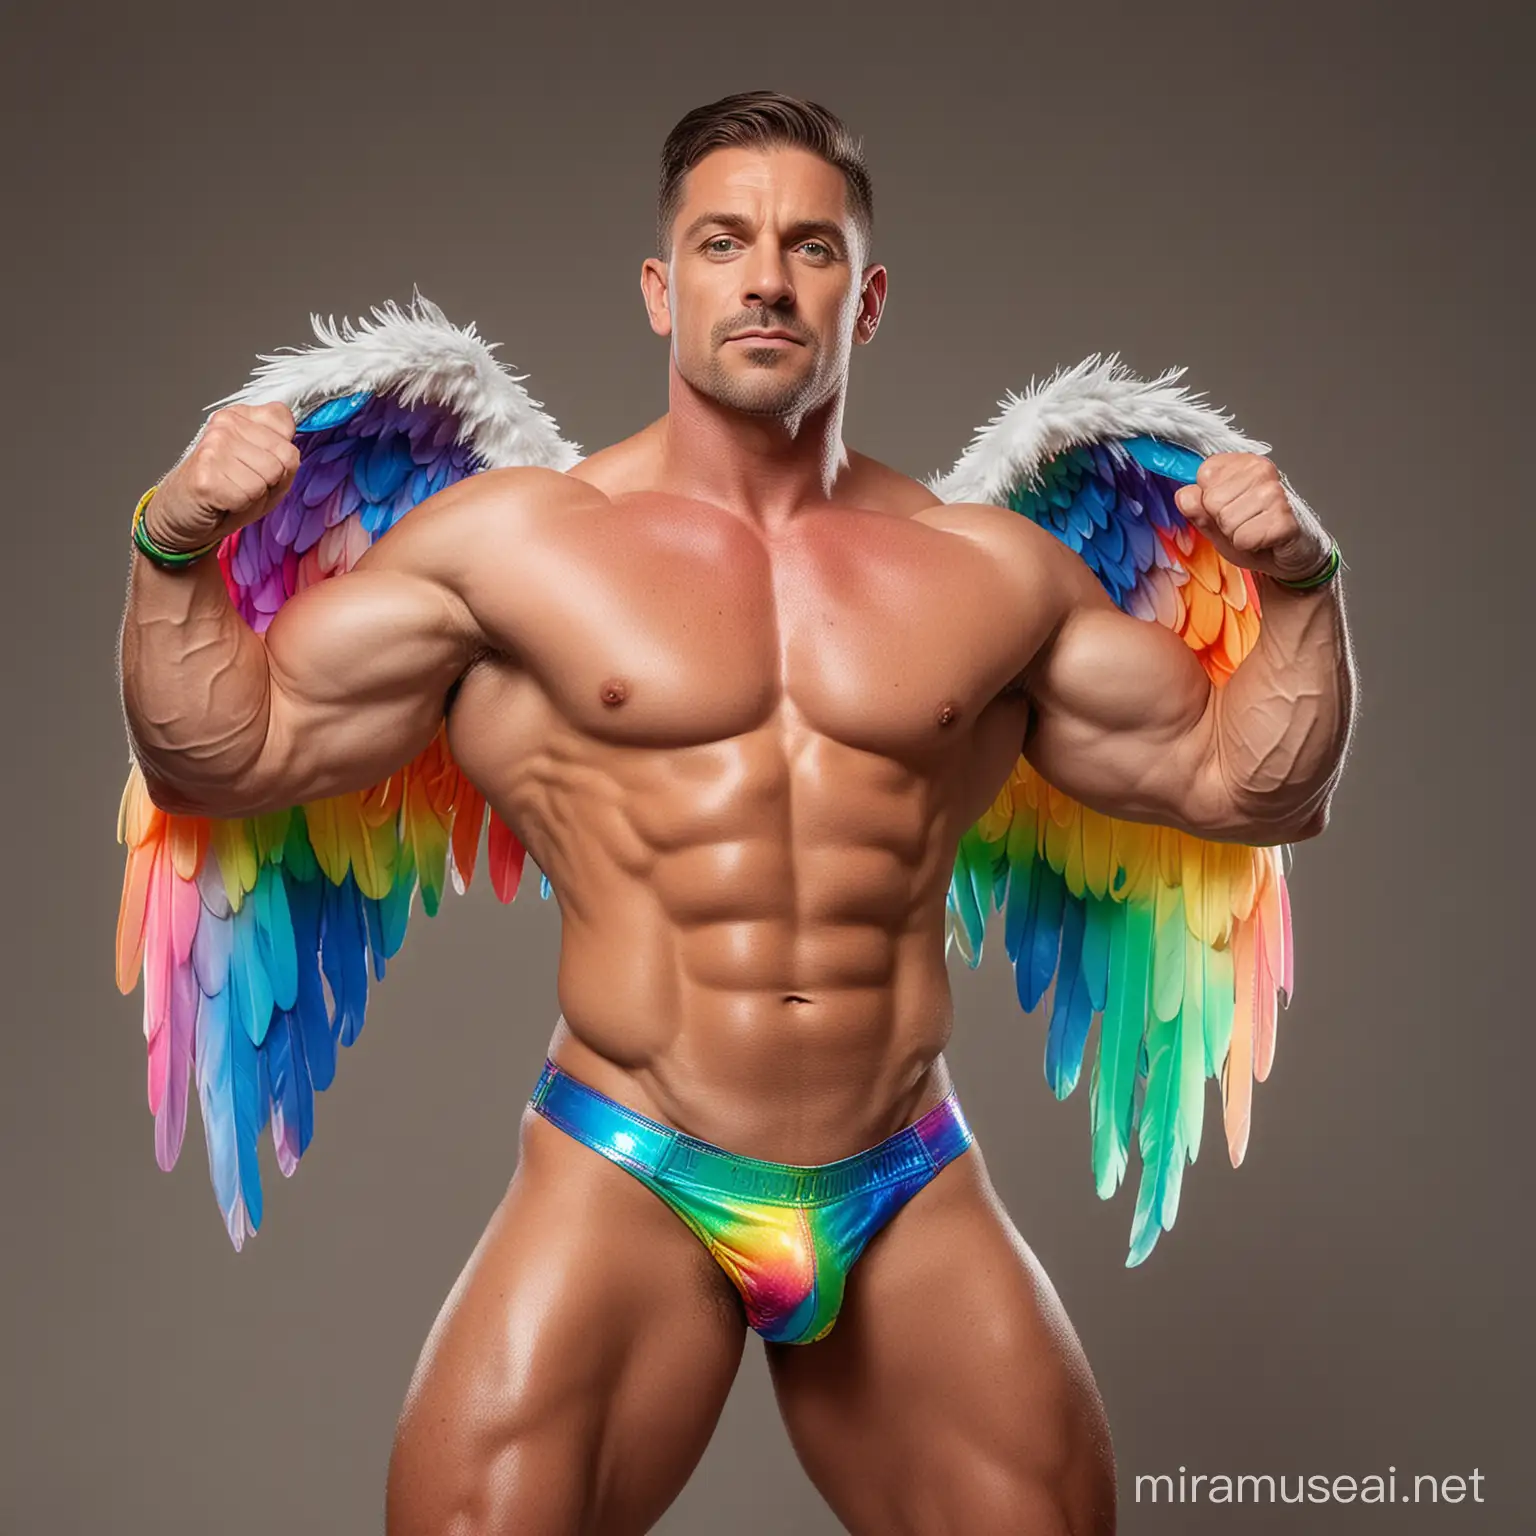 Muscular Bodybuilder with Rainbow Jacket and Eagle Wings Flexing